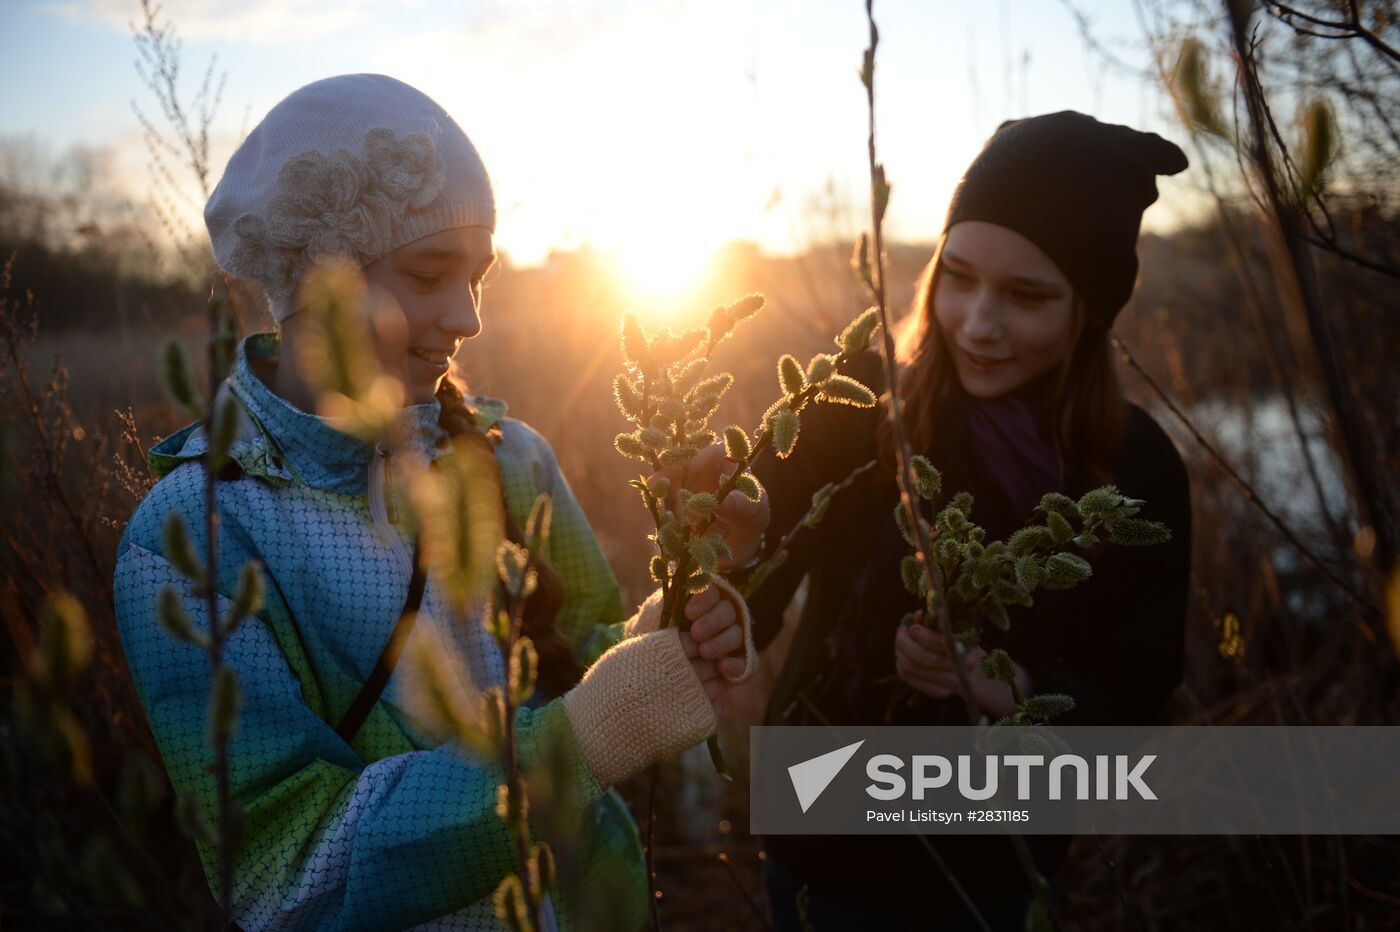 People collect willow branches for Palm Sunday on Lake Shartash in Yekaterinburg